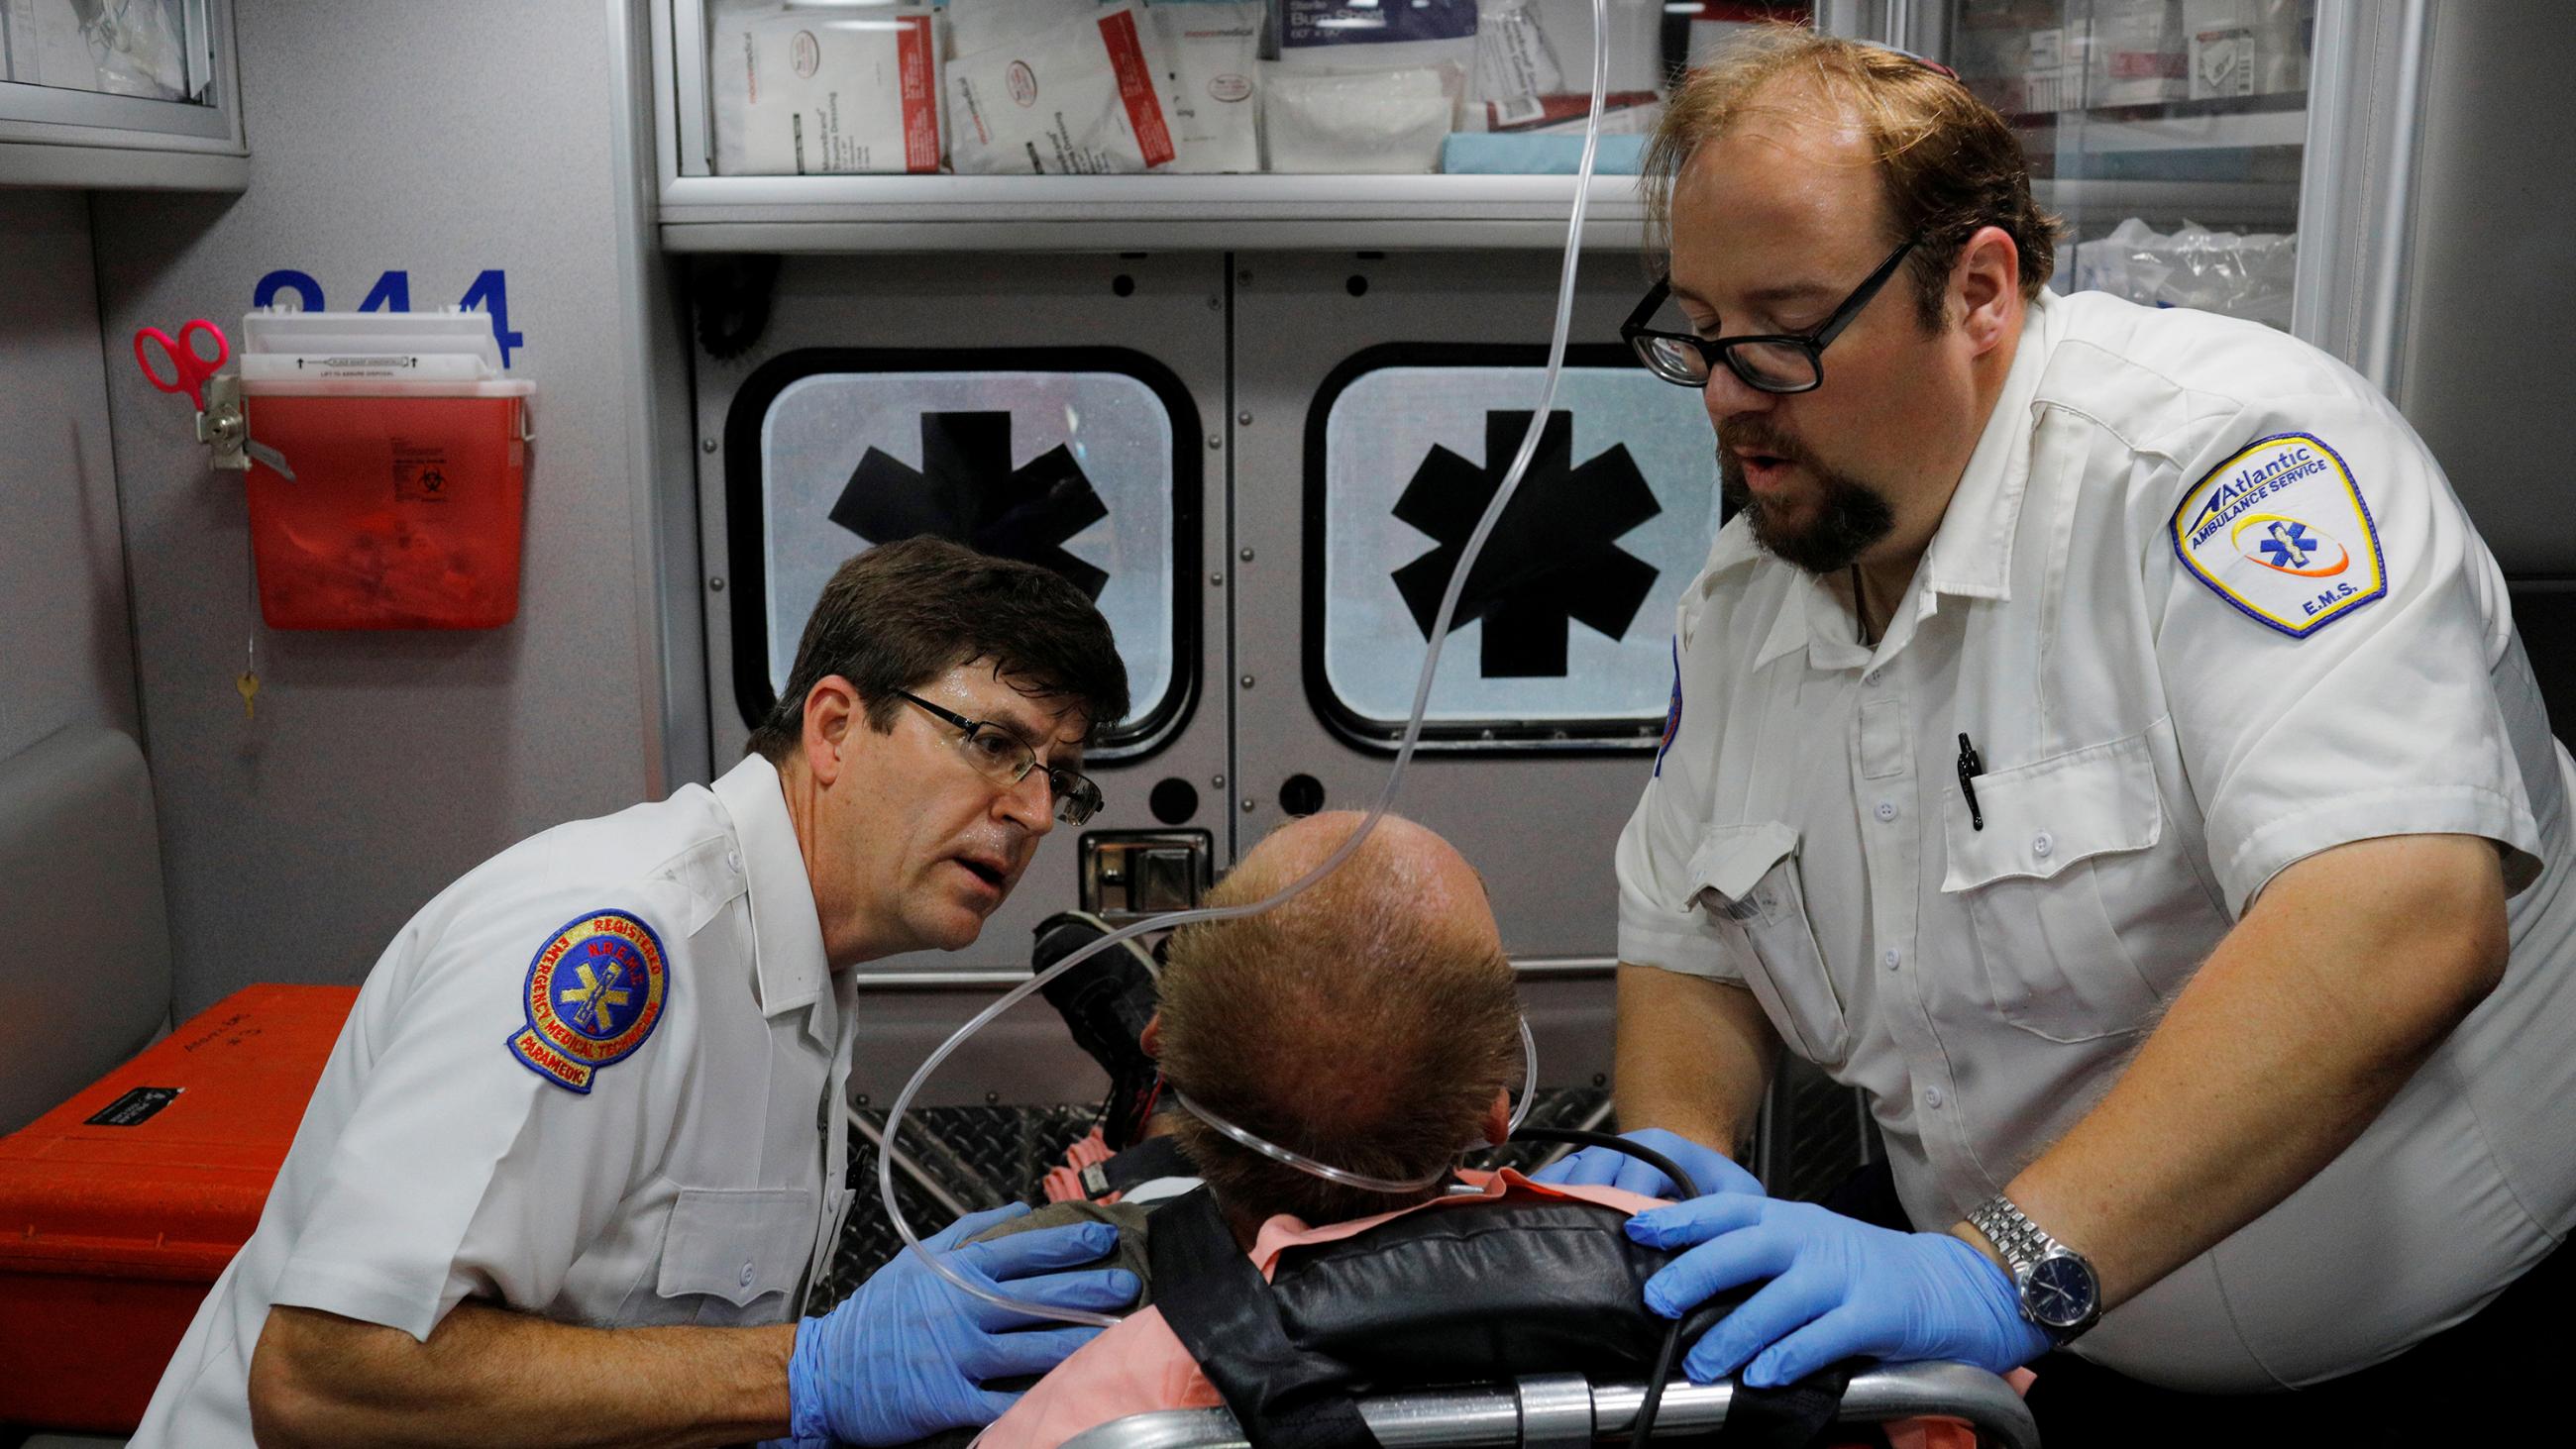 The photo shows the two medics administering to a man in a gurney. 